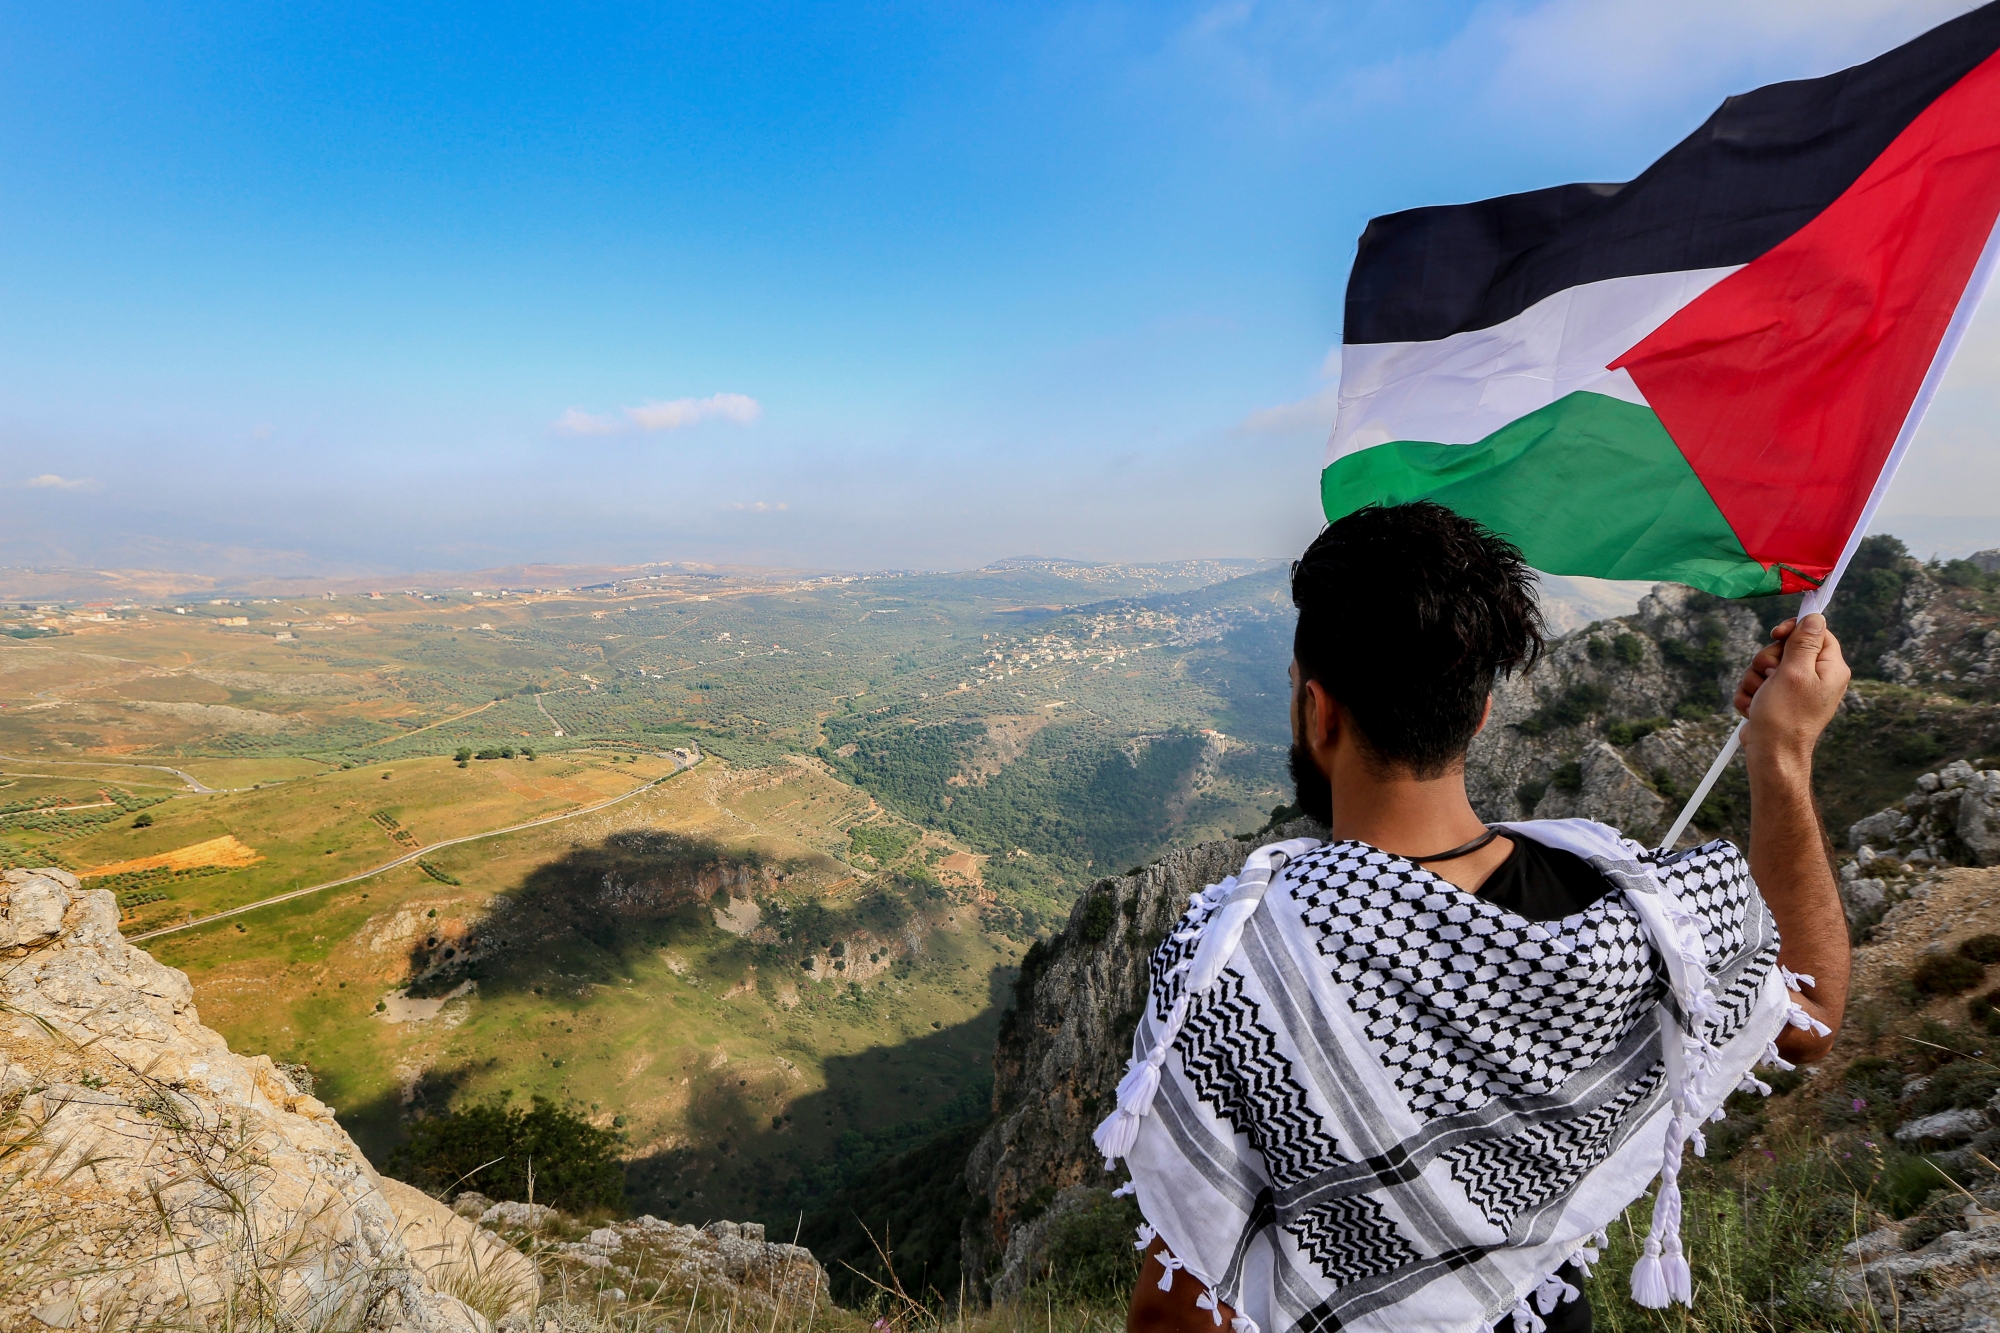 epa06739539 Palestinian refugees wave their national flags and chant slogans against Israeli occupation during the 70th anniversary of the Nakba, in al-Chkif Castle, near the border with Palestine, South Lebanon, 15 May 2018. Palestinians from all their camps of Lebanon marched to south Lebanon to mark the 70th anniversary of Nakba Day (Day of the Catastrophe) on 15 May to commemorate the expulsion of more than 700,000 Palestinians from their land in the war surrounding the establishment of the state of Israel.  EPA/NABIL MOUNZER LEBANON PALESTINE NAKBA COMMEMORATE